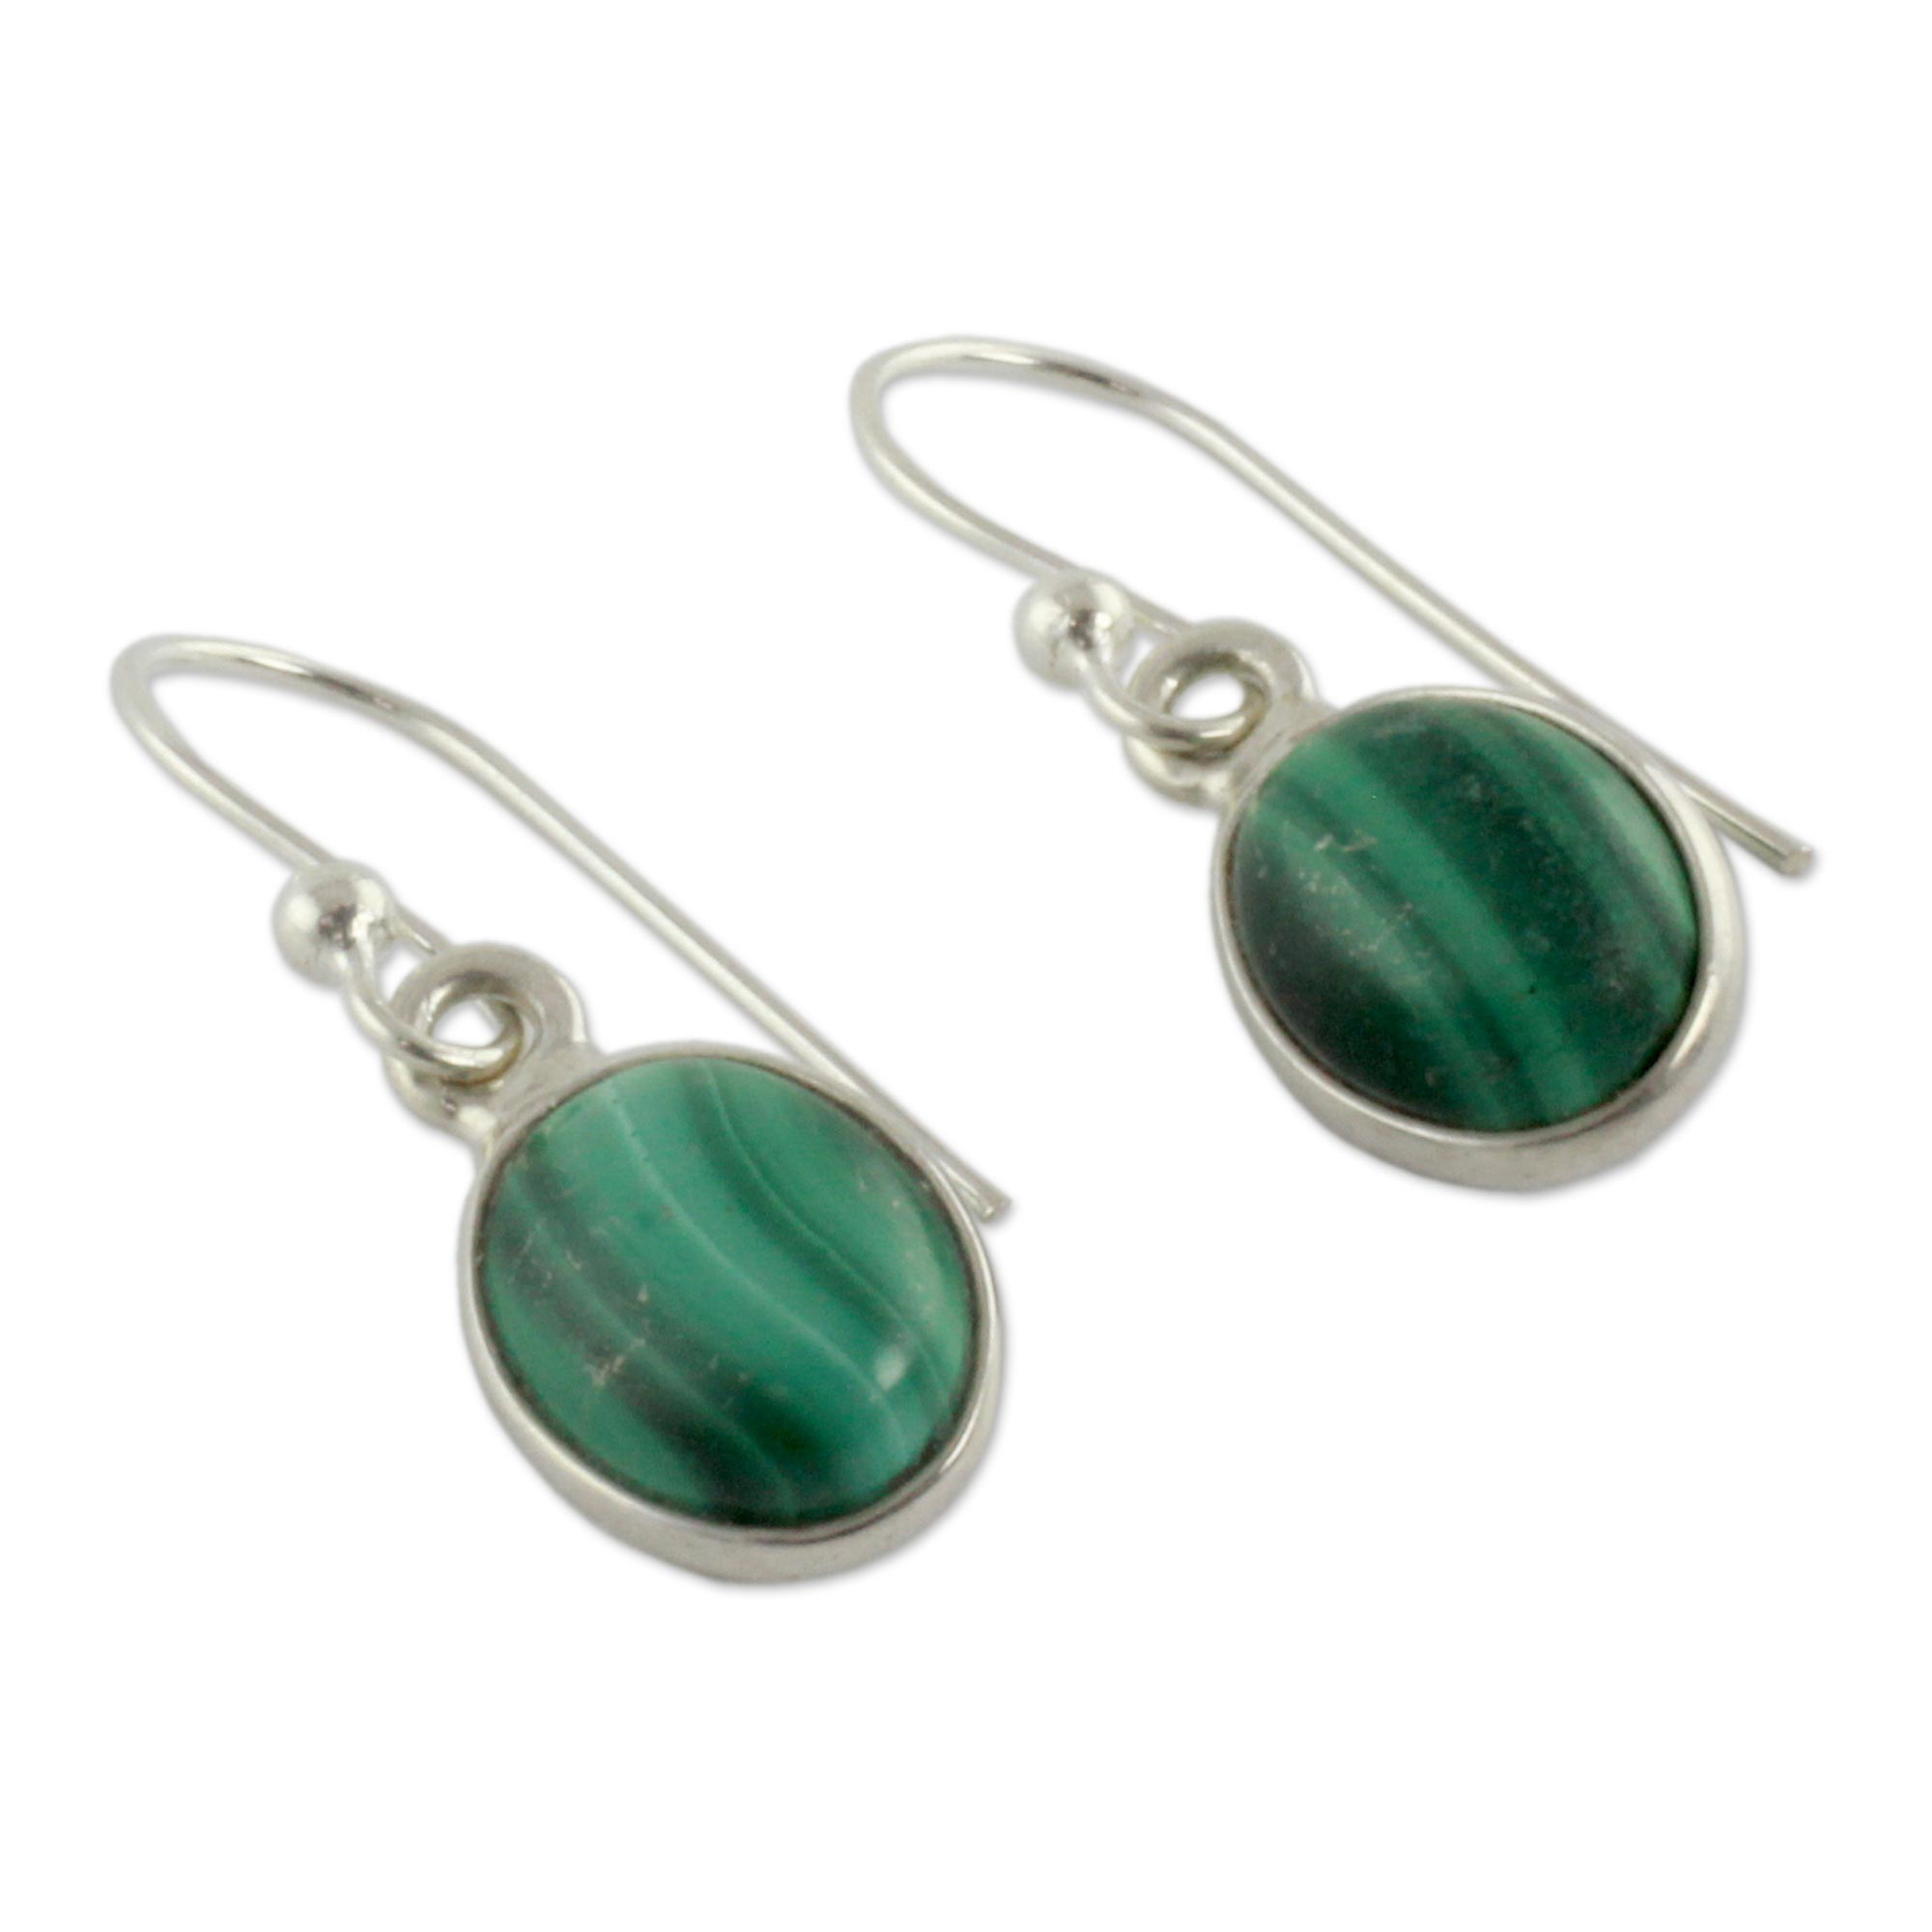 Silver and Malachite Earrings Crafted in India - Verdant Paths | NOVICA